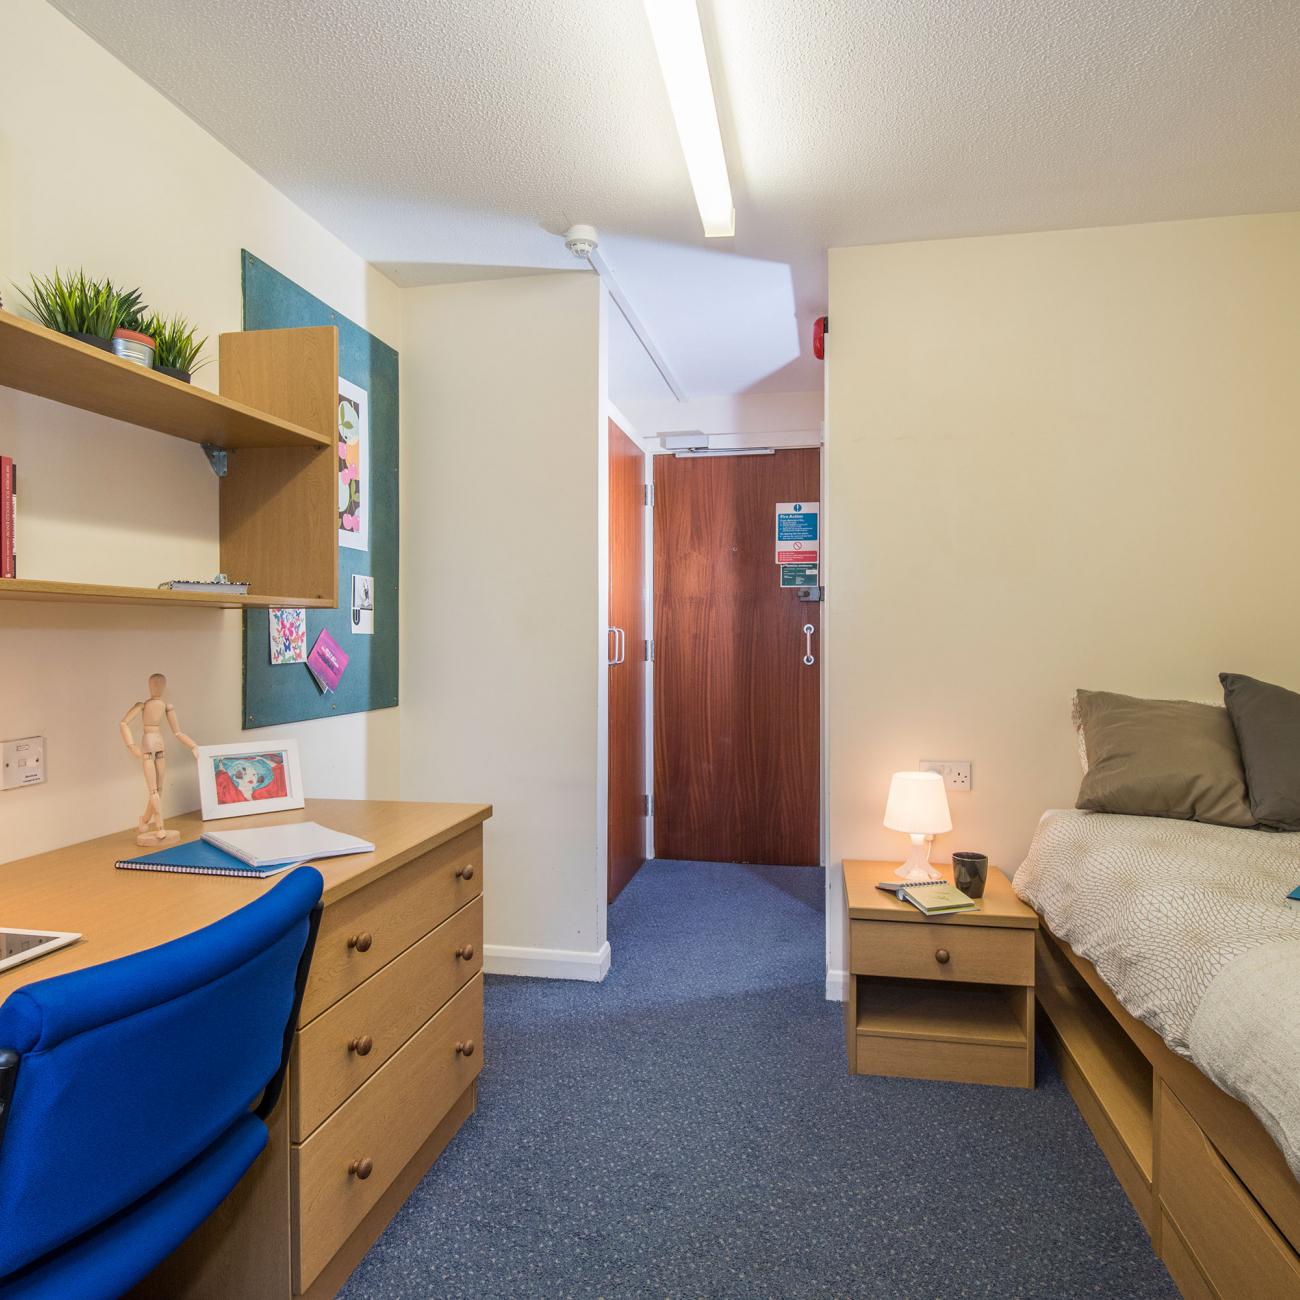 A student bedroom containing a working desk area and a neatly made bed. In the background a door opens to a bathroom.